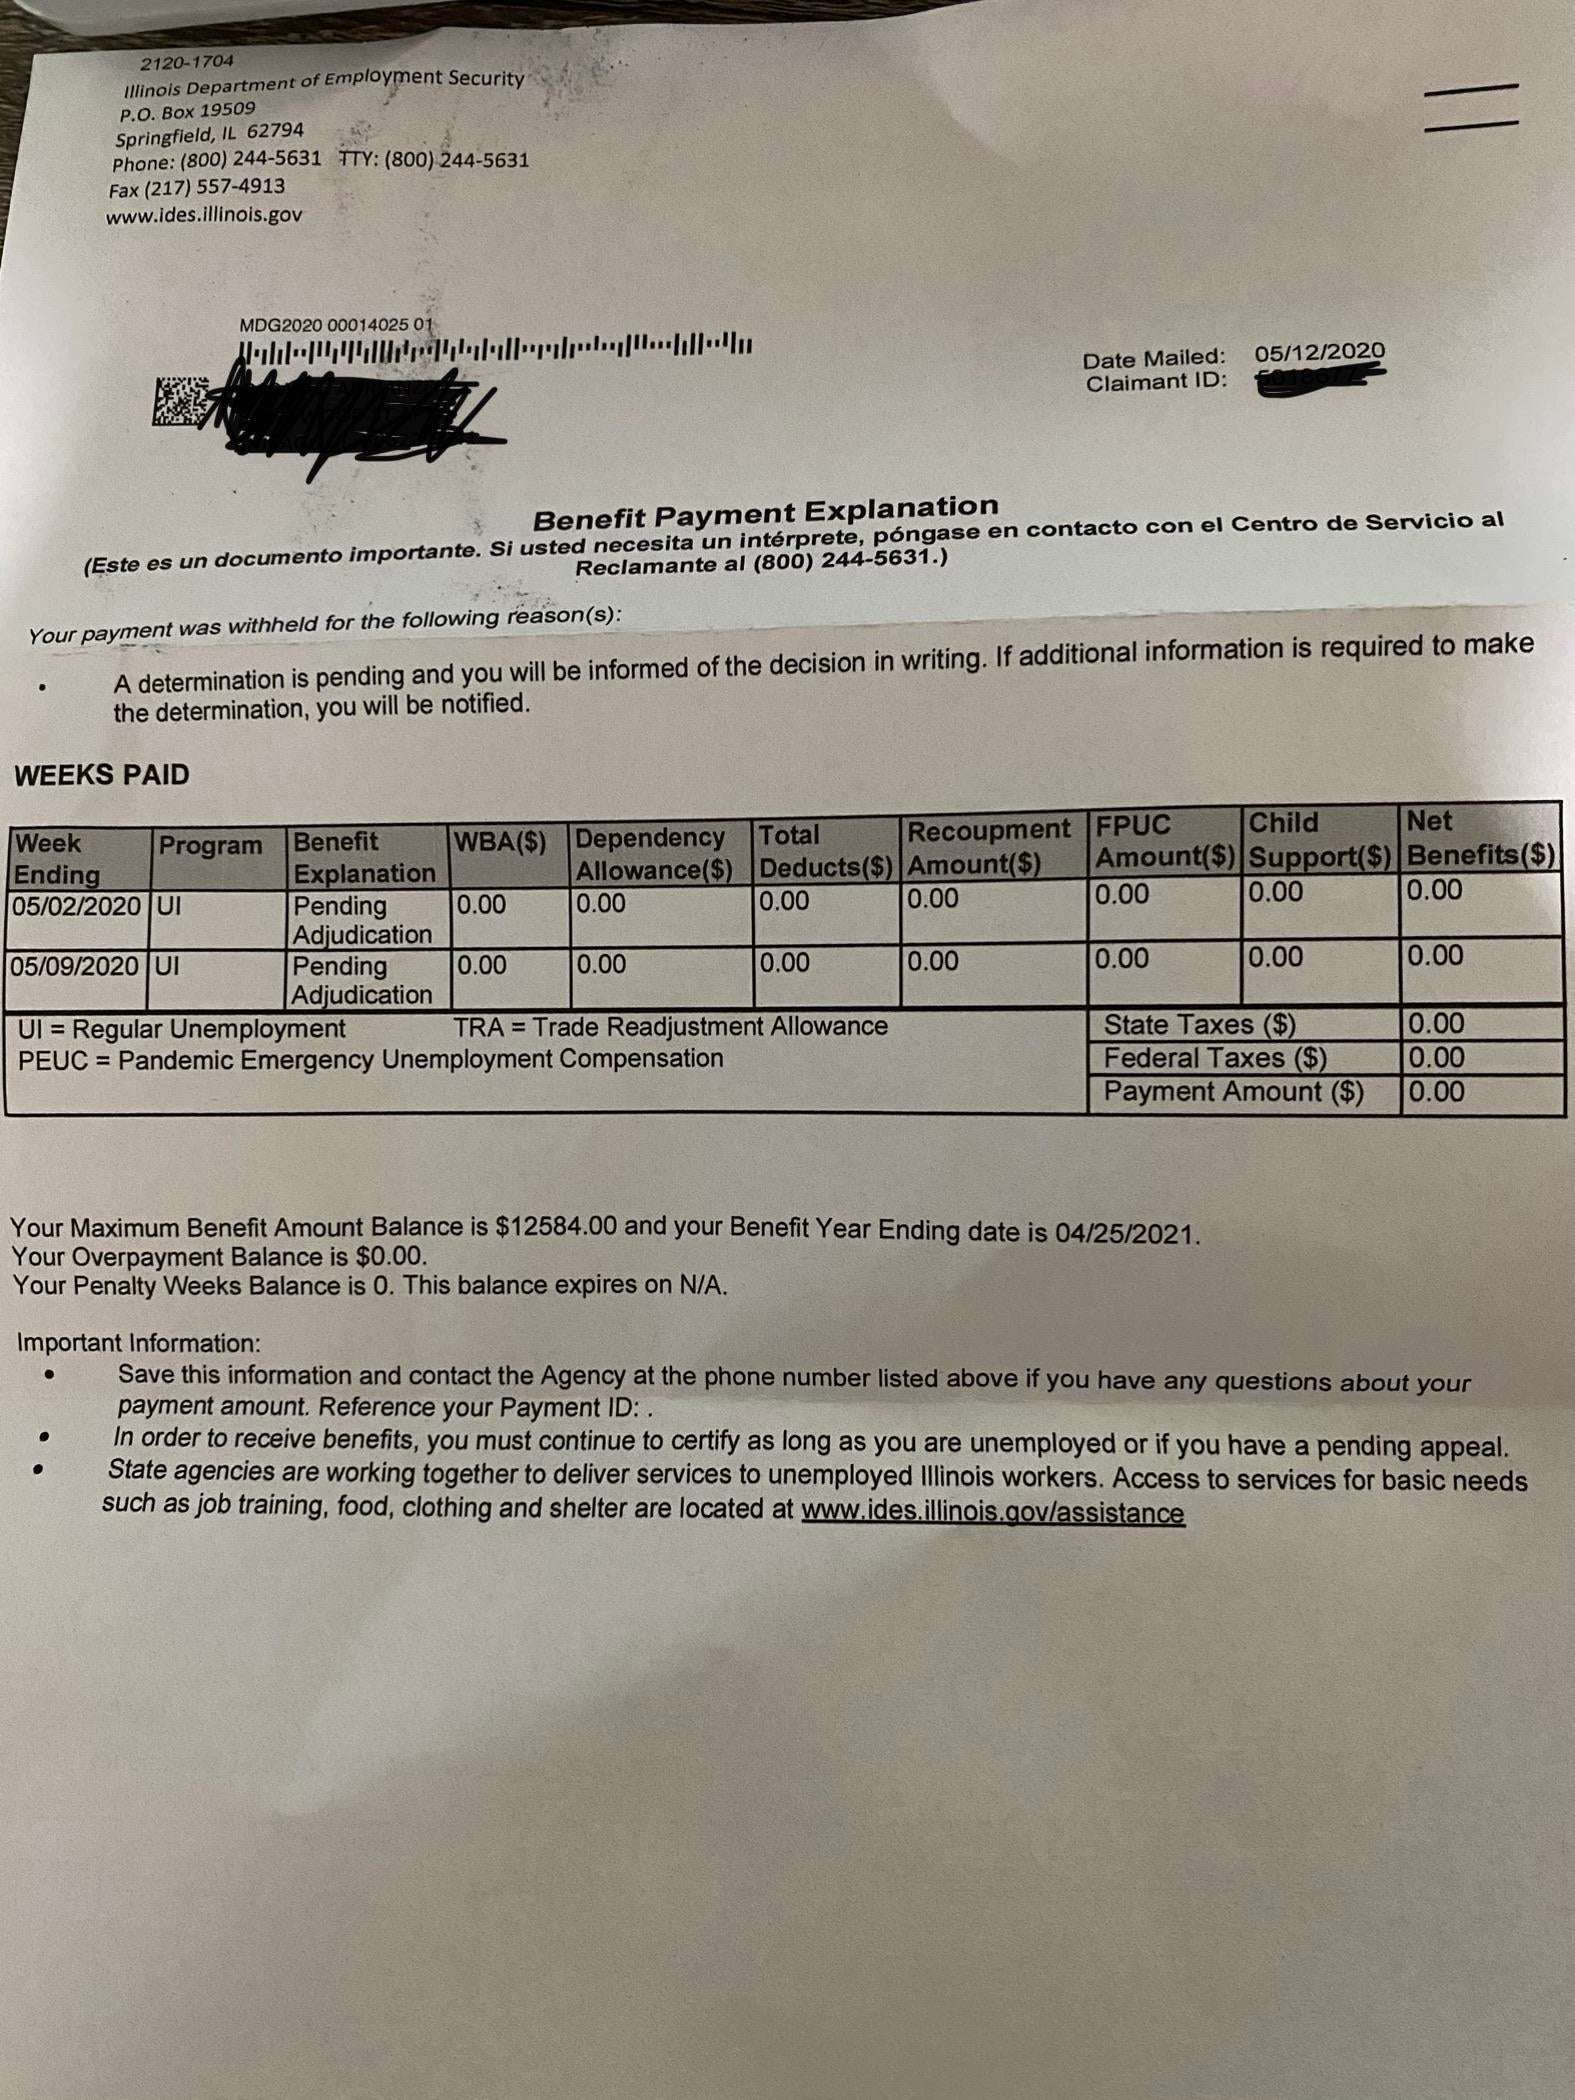 [Illinois] Benefit Payment Explanation Letter, what does this mean ...